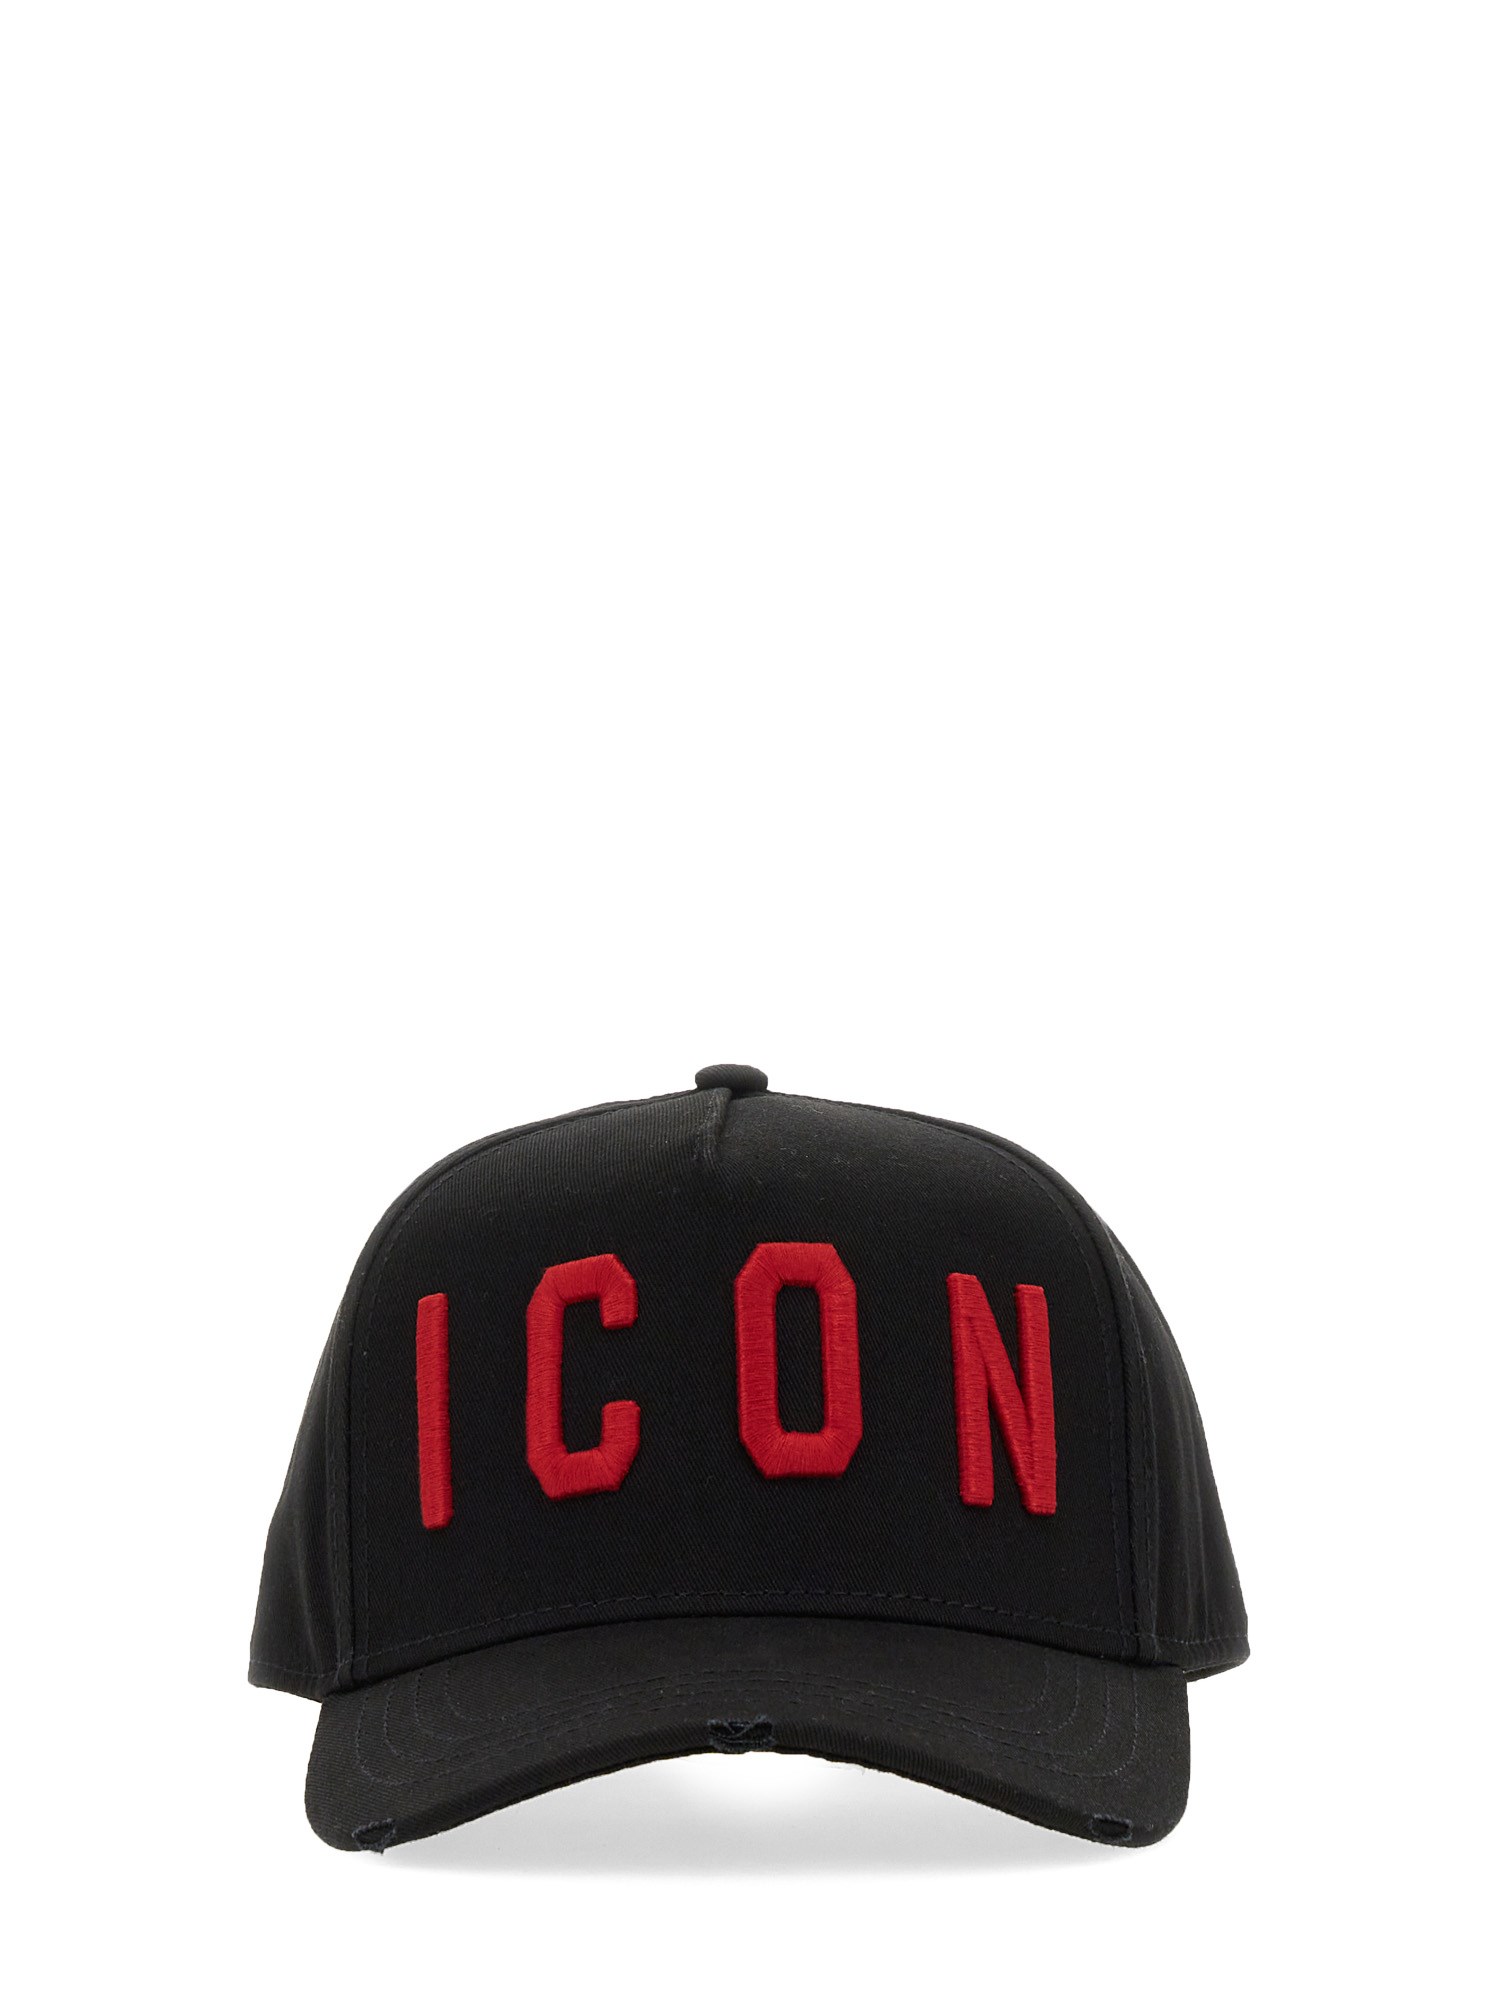 dsquared baseball hat with logo